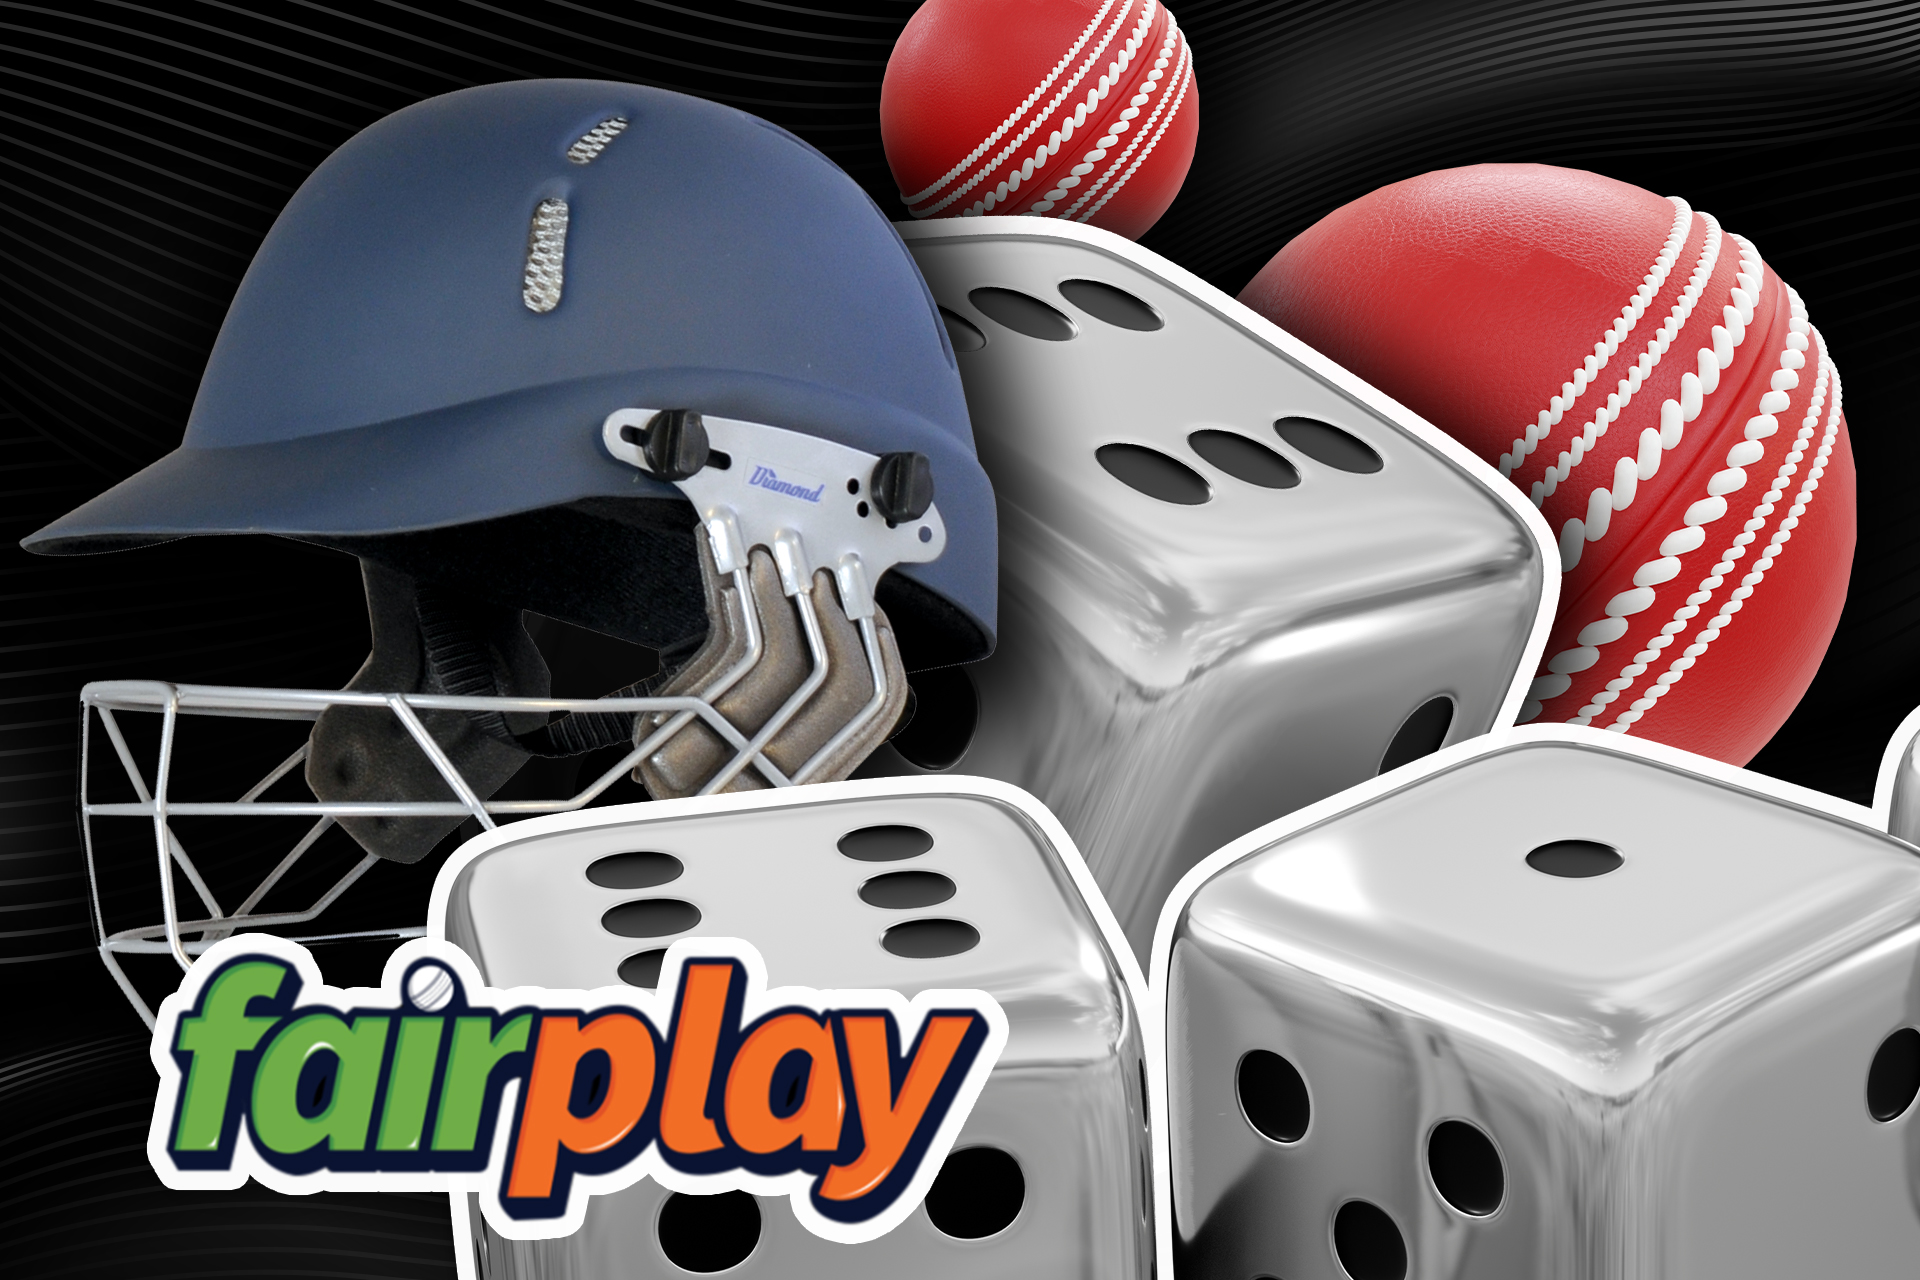 Fairplay allow betting on all the IPL 2023 matches in its sportsbook.